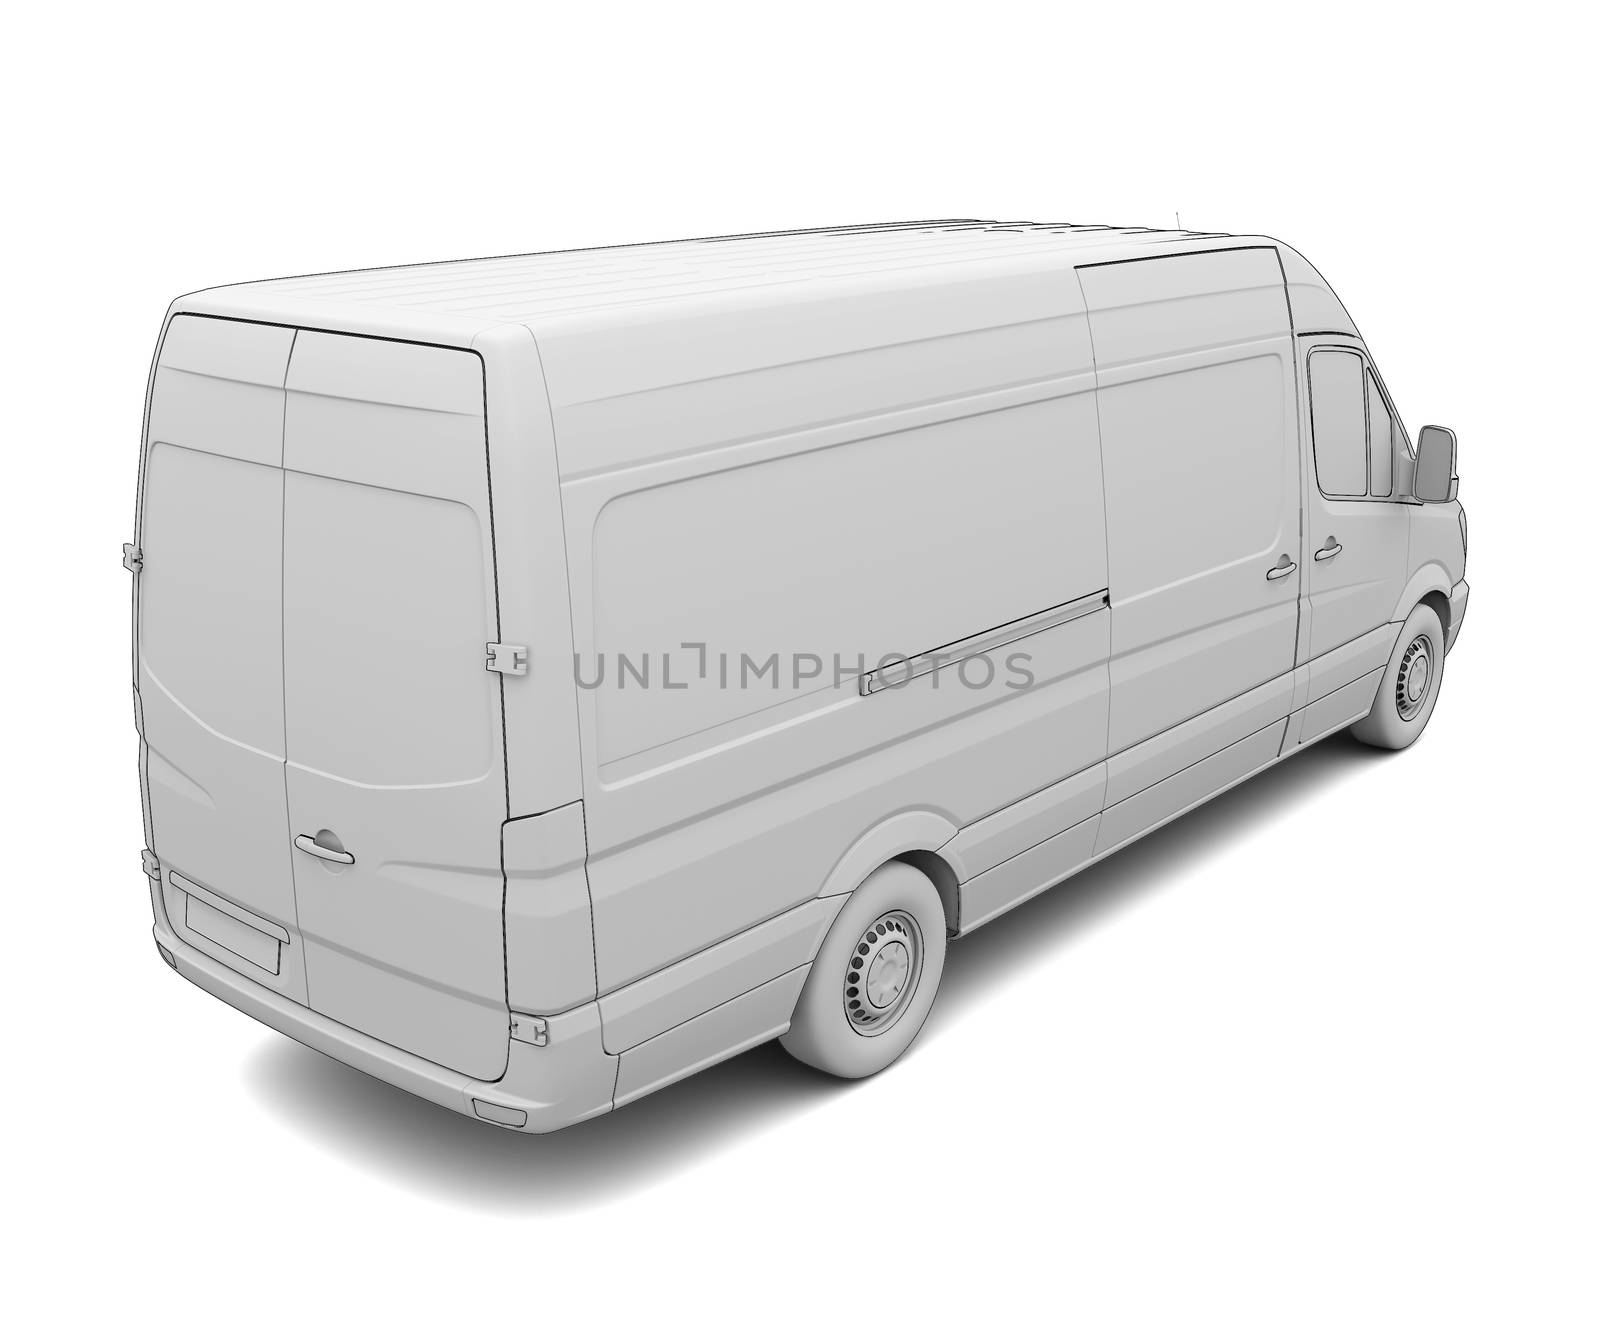 Sketch white van. Isolated render on a white background